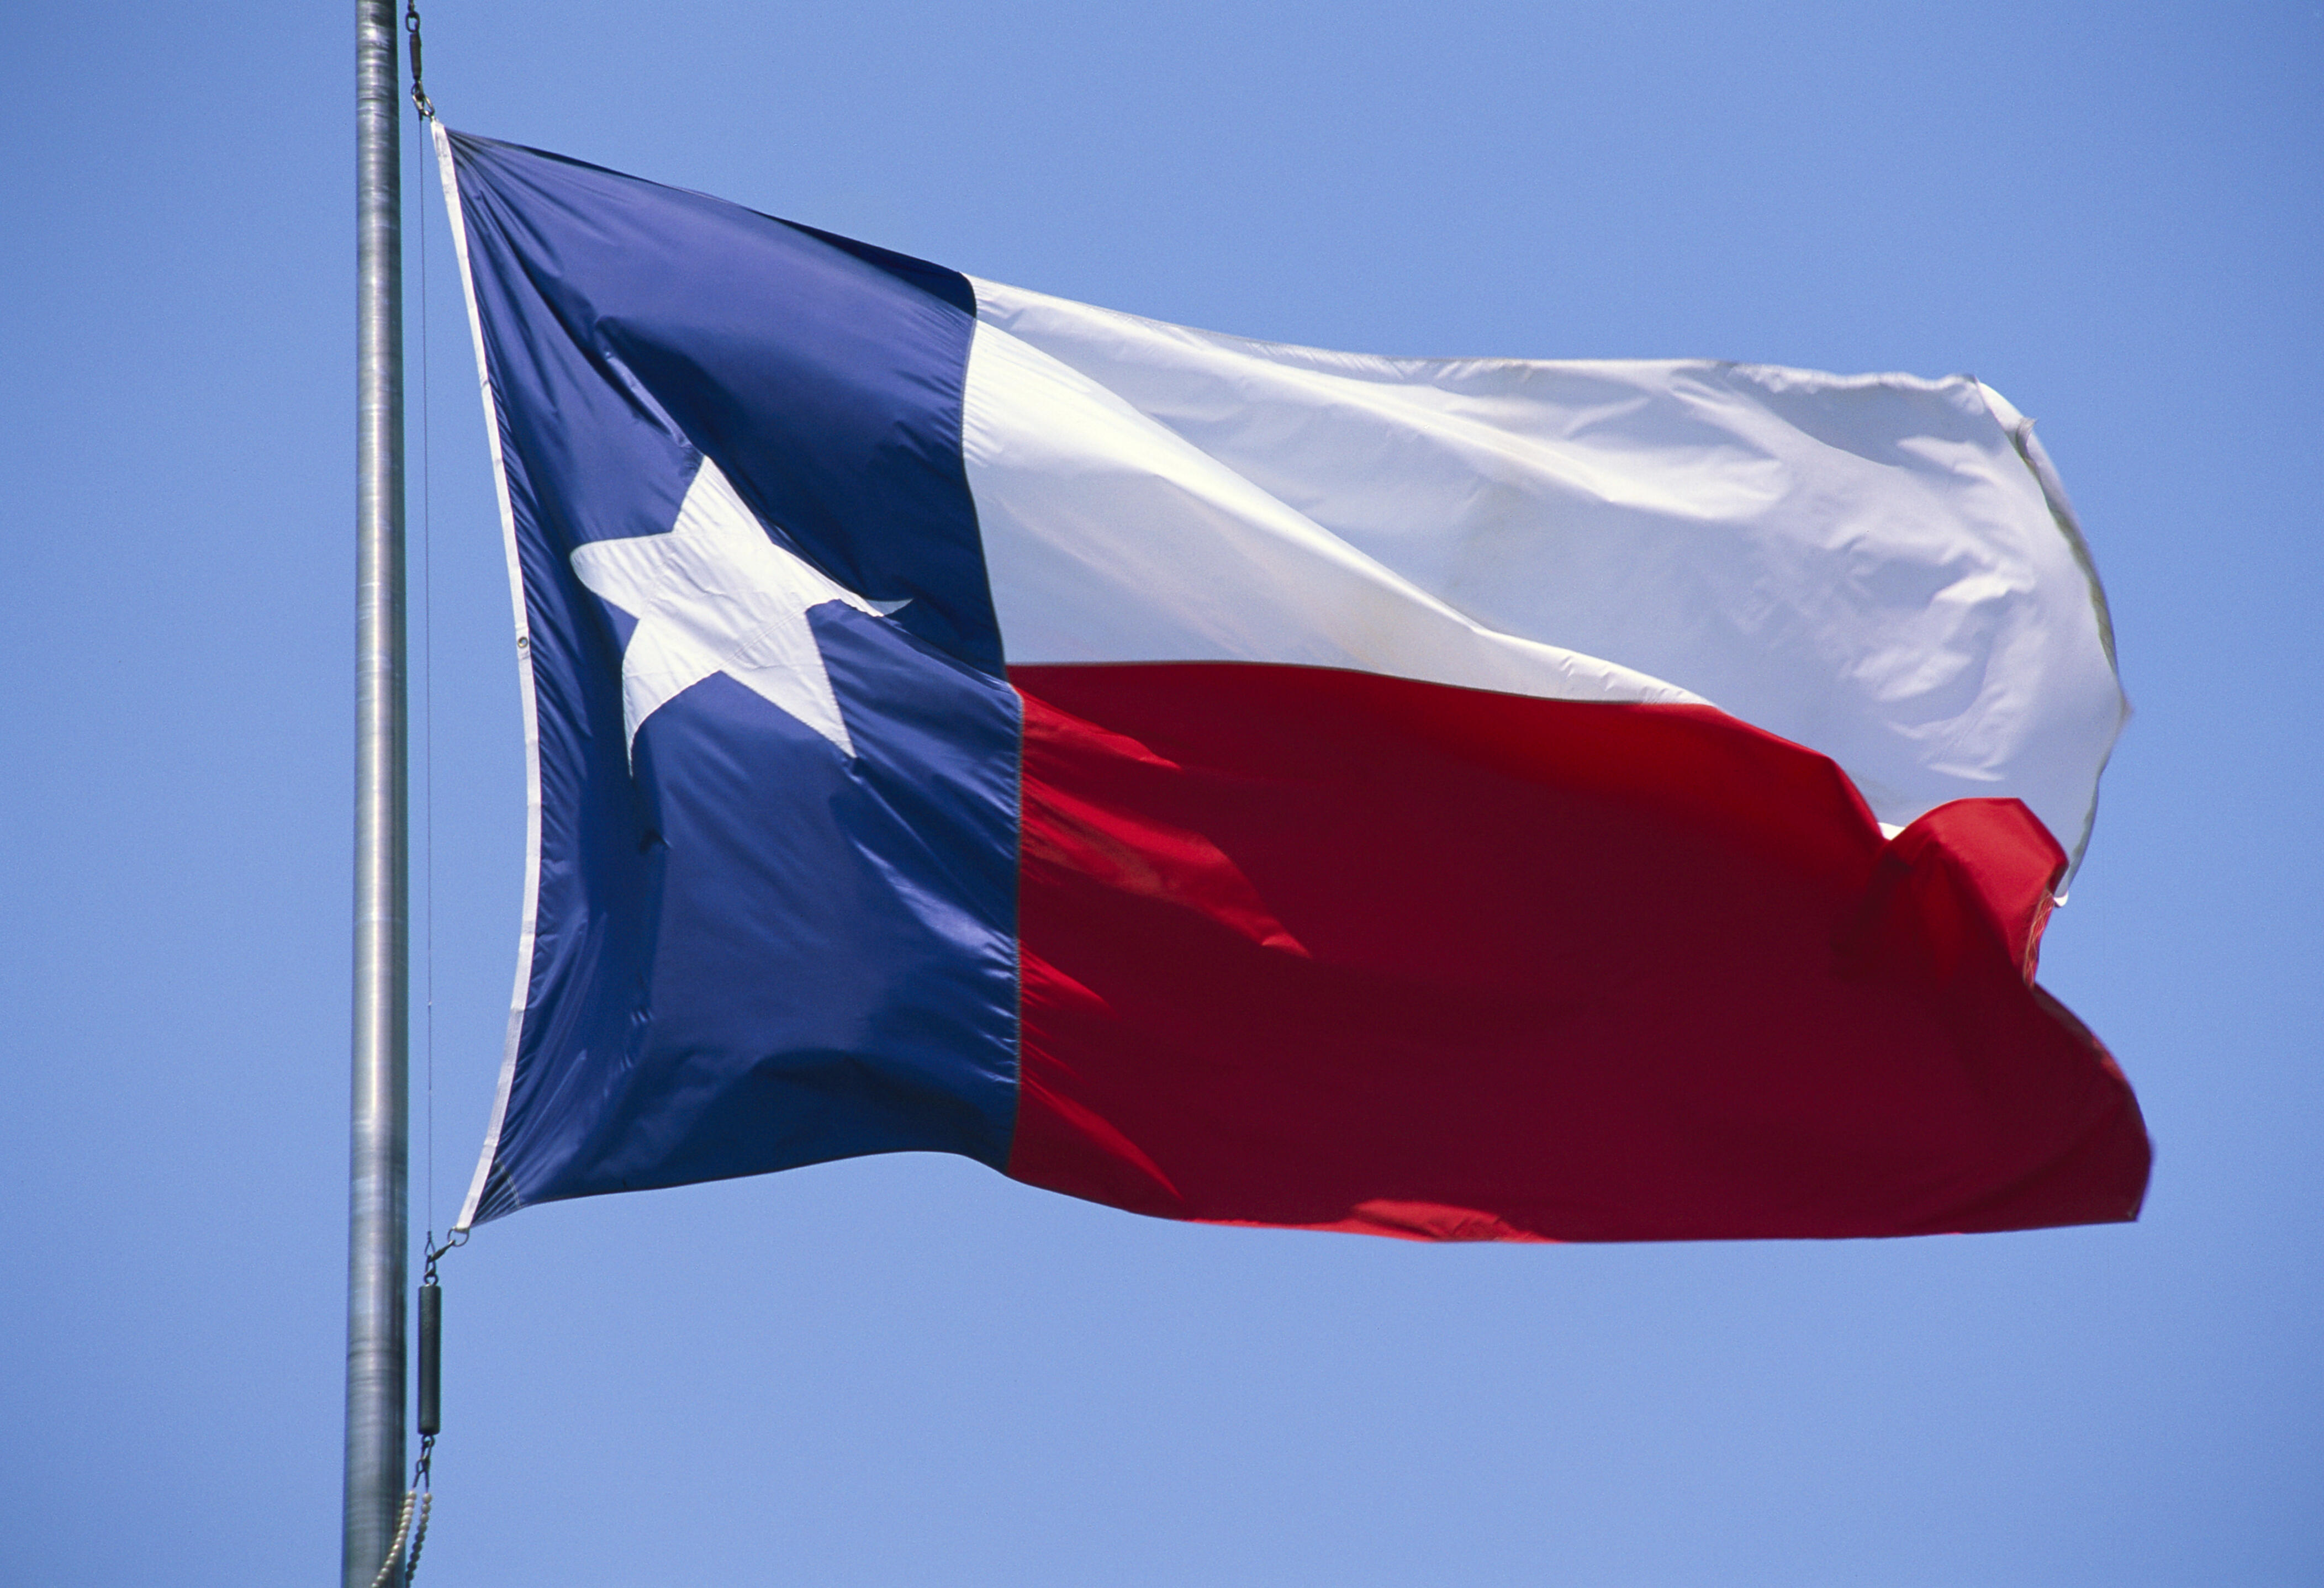 Texas' big cities going liberal might be turning the state purple